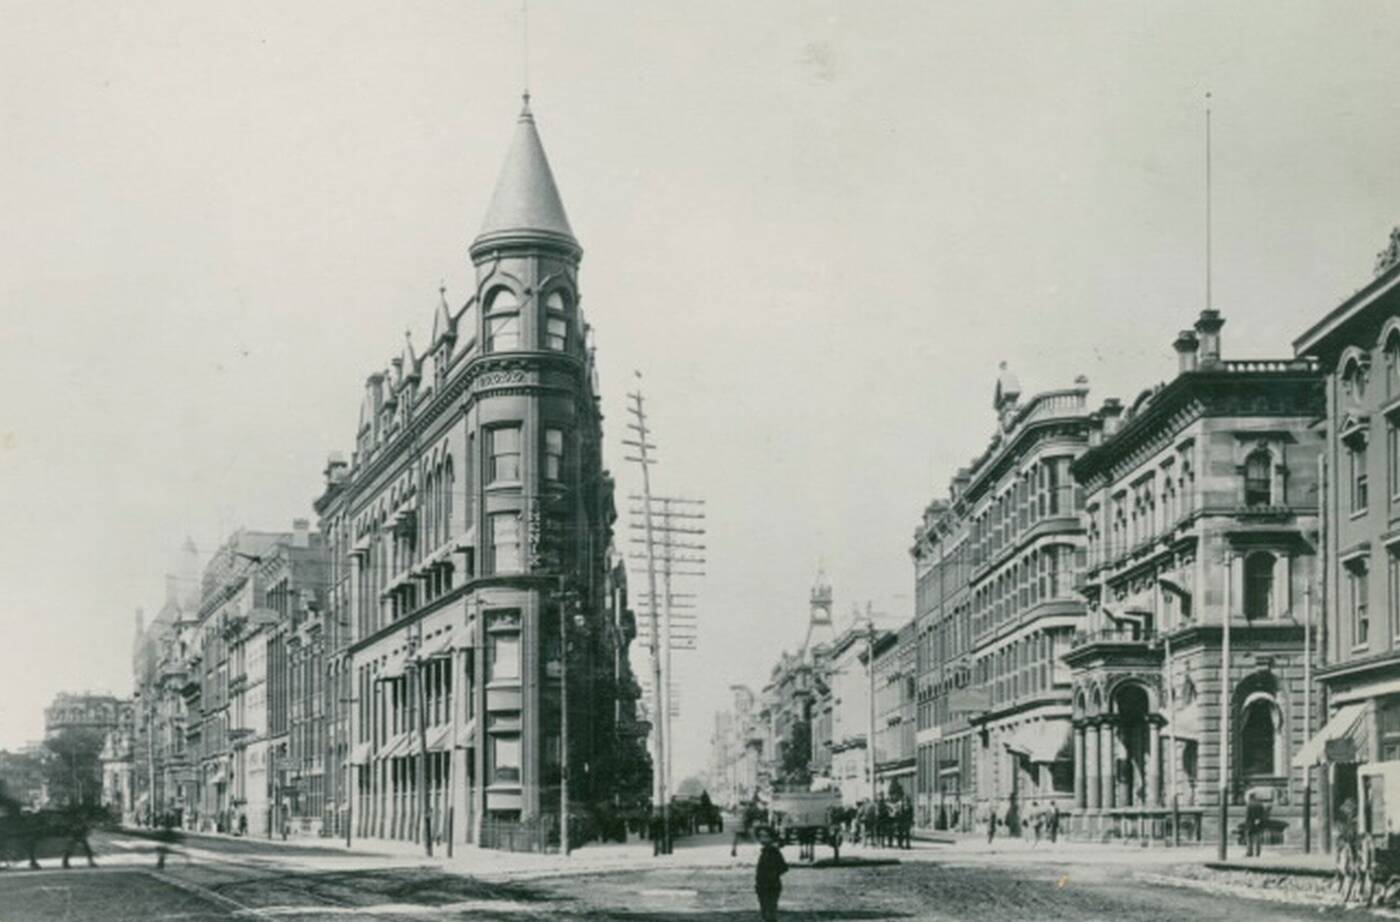 The history of the Flatiron Building in Toronto